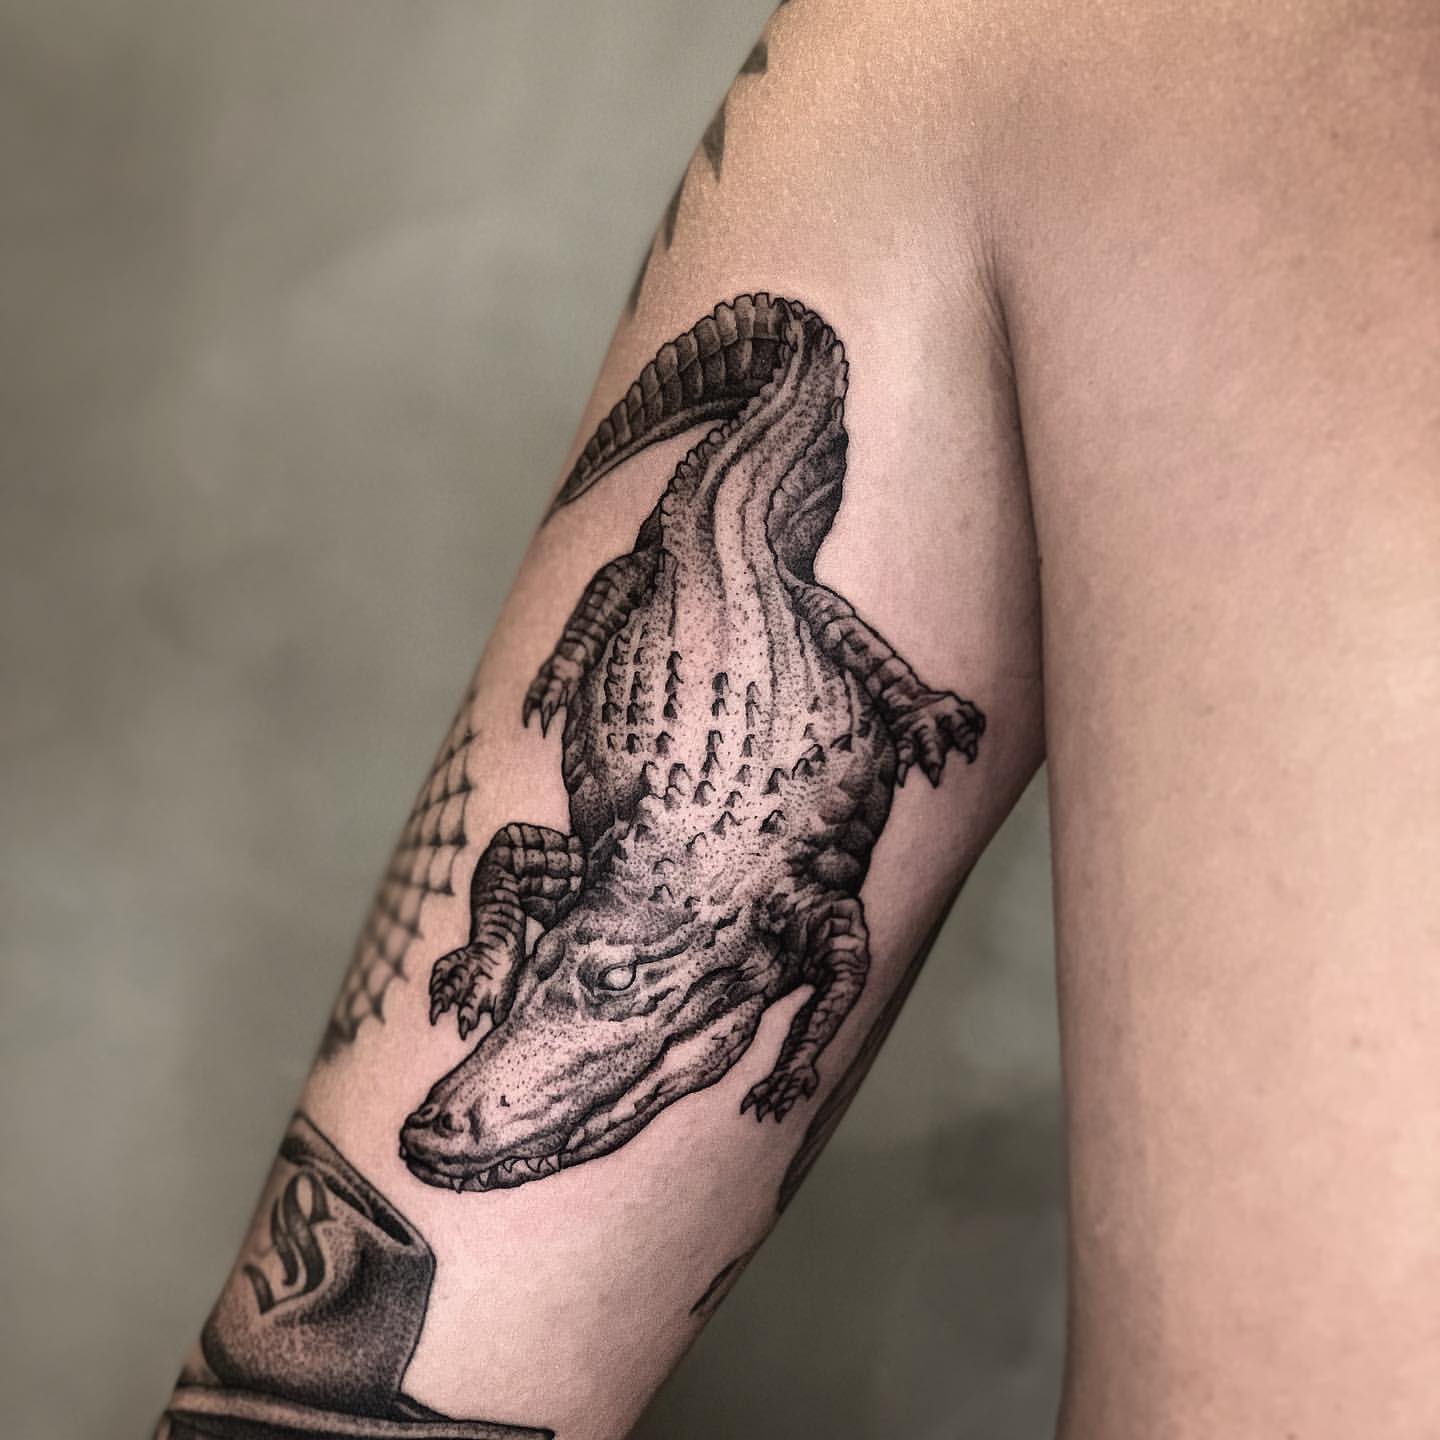 28 Awesome Alligator Tattoo Ideas for Men & Women in 2023